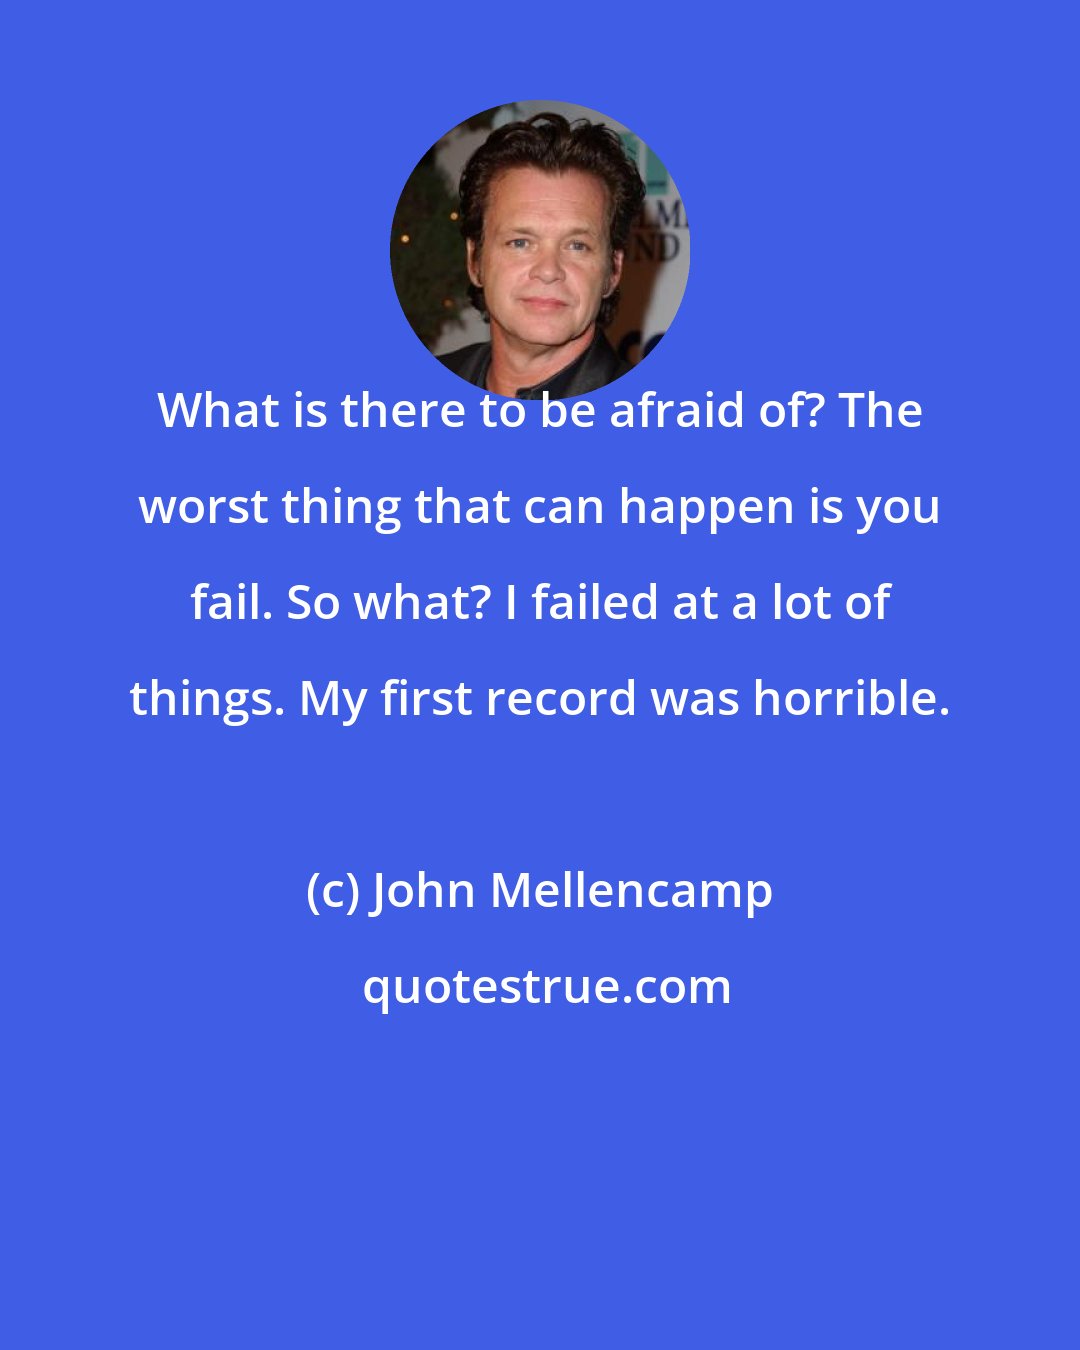 John Mellencamp: What is there to be afraid of? The worst thing that can happen is you fail. So what? I failed at a lot of things. My first record was horrible.